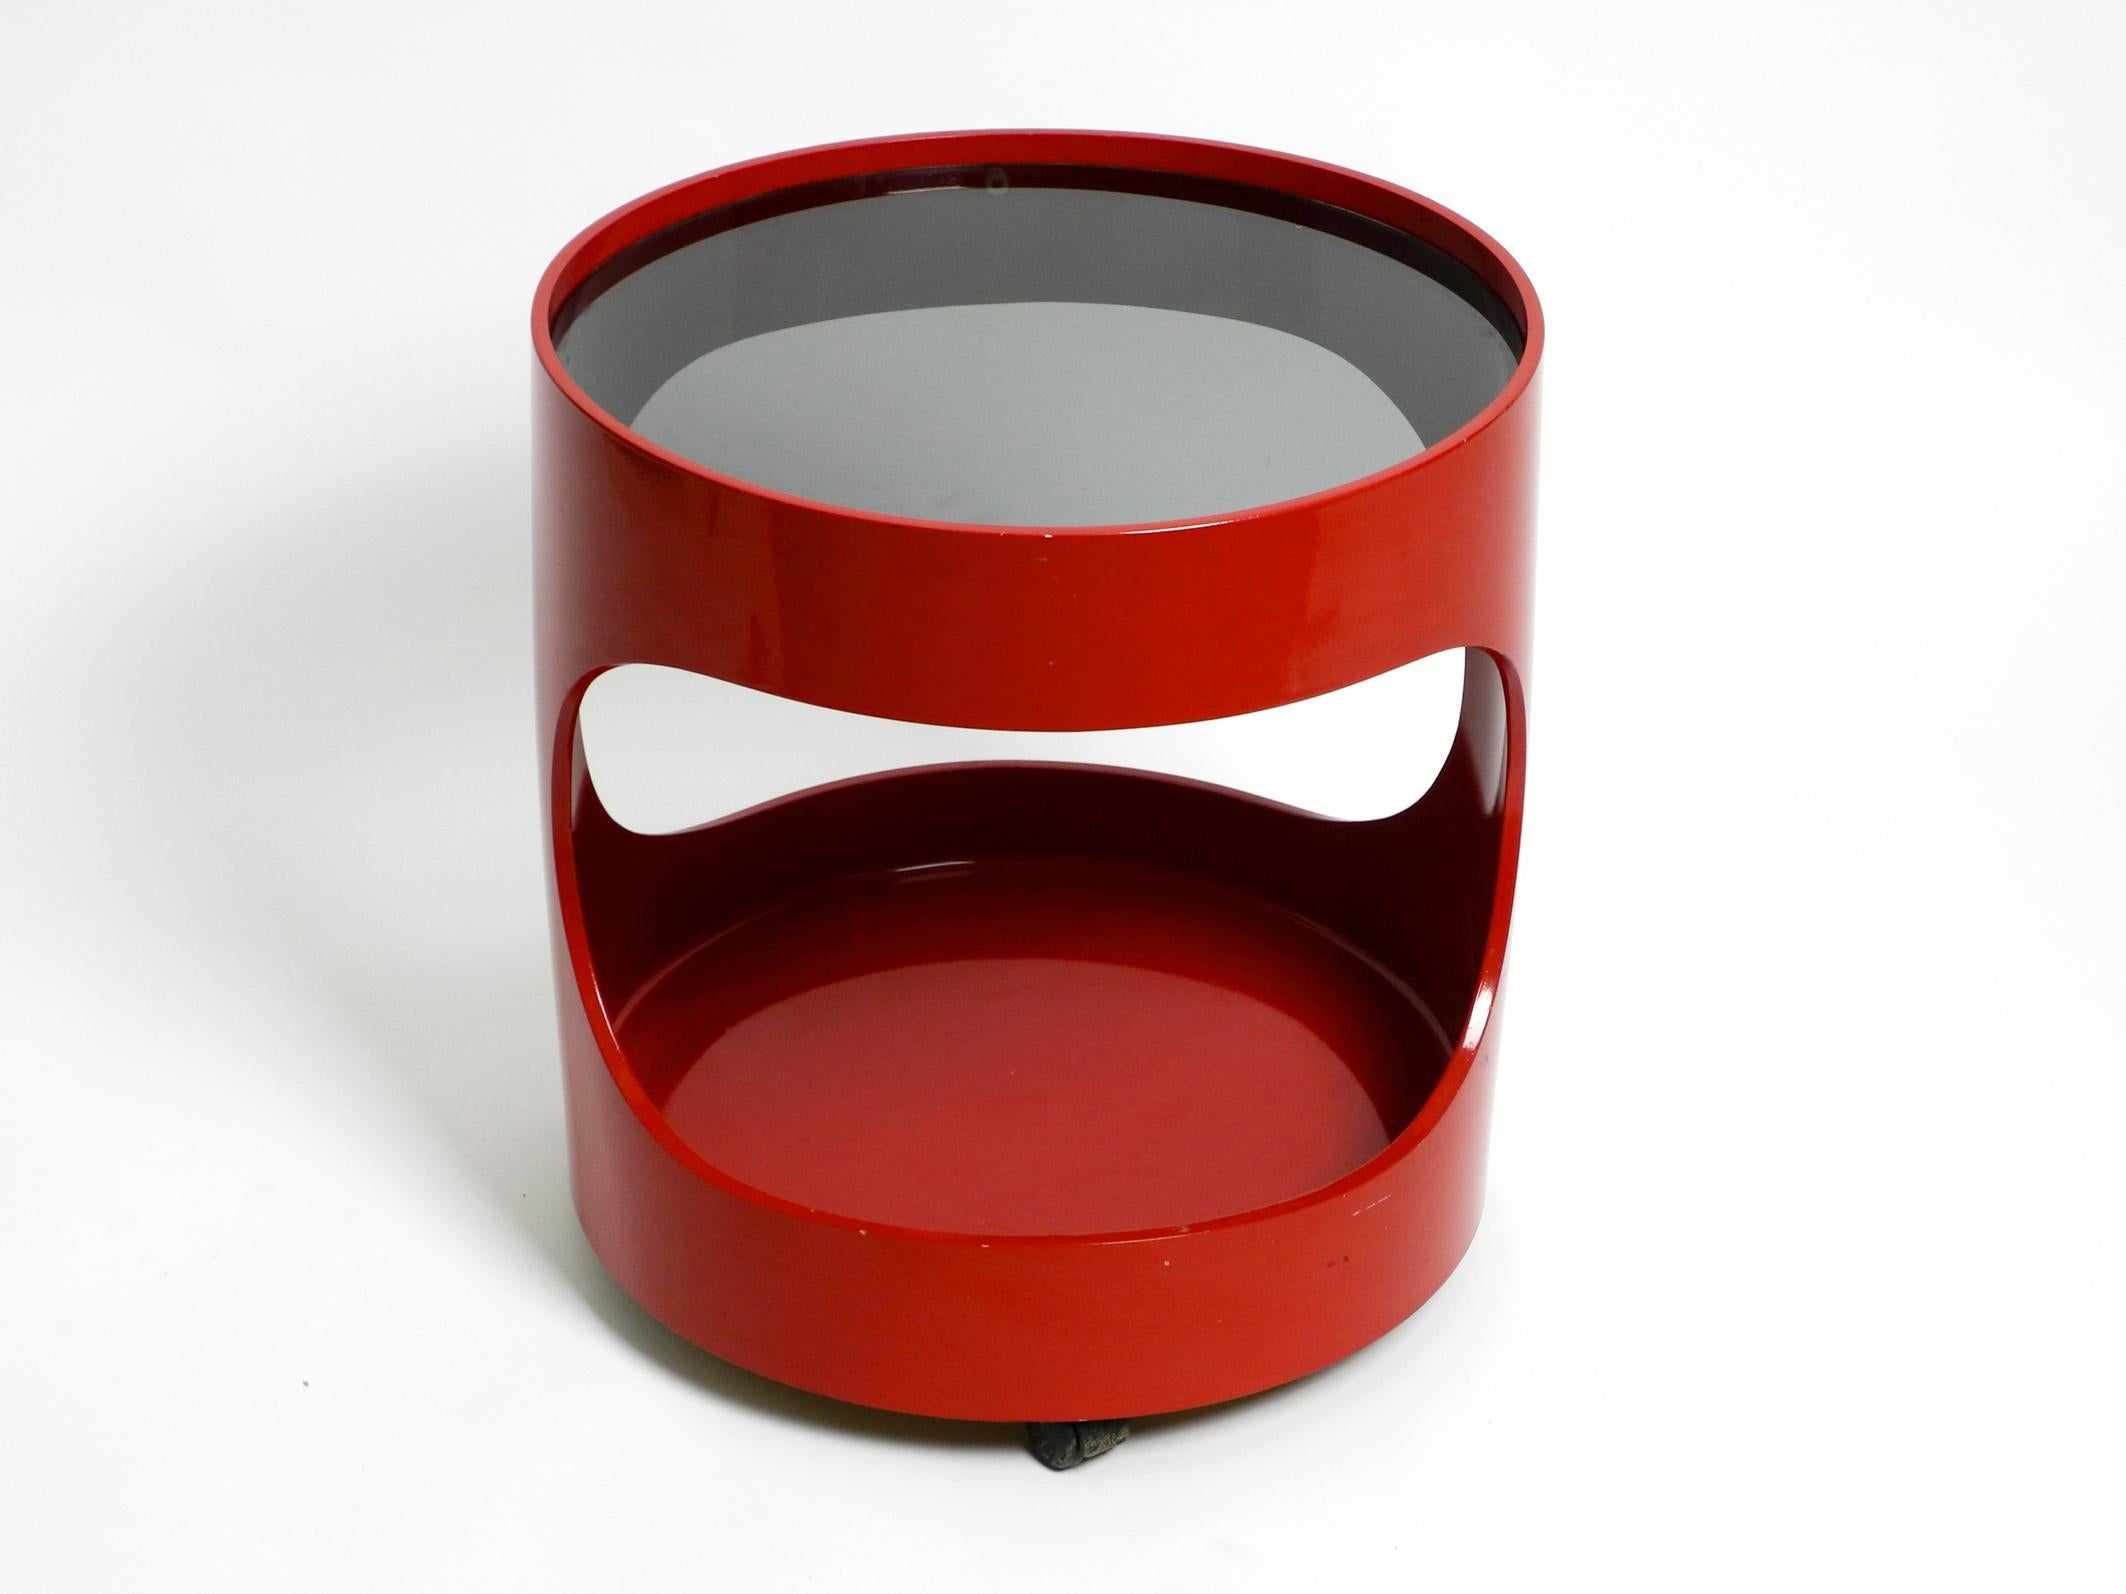 Beautiful rare original 1970s red round side table from Opal. Model Luna.
Very beautiful space age design with a real smoked glass plate. Table frame is made of red plastic.
With 4 wheels on the bottom. Moves very smoothly and quietly in all